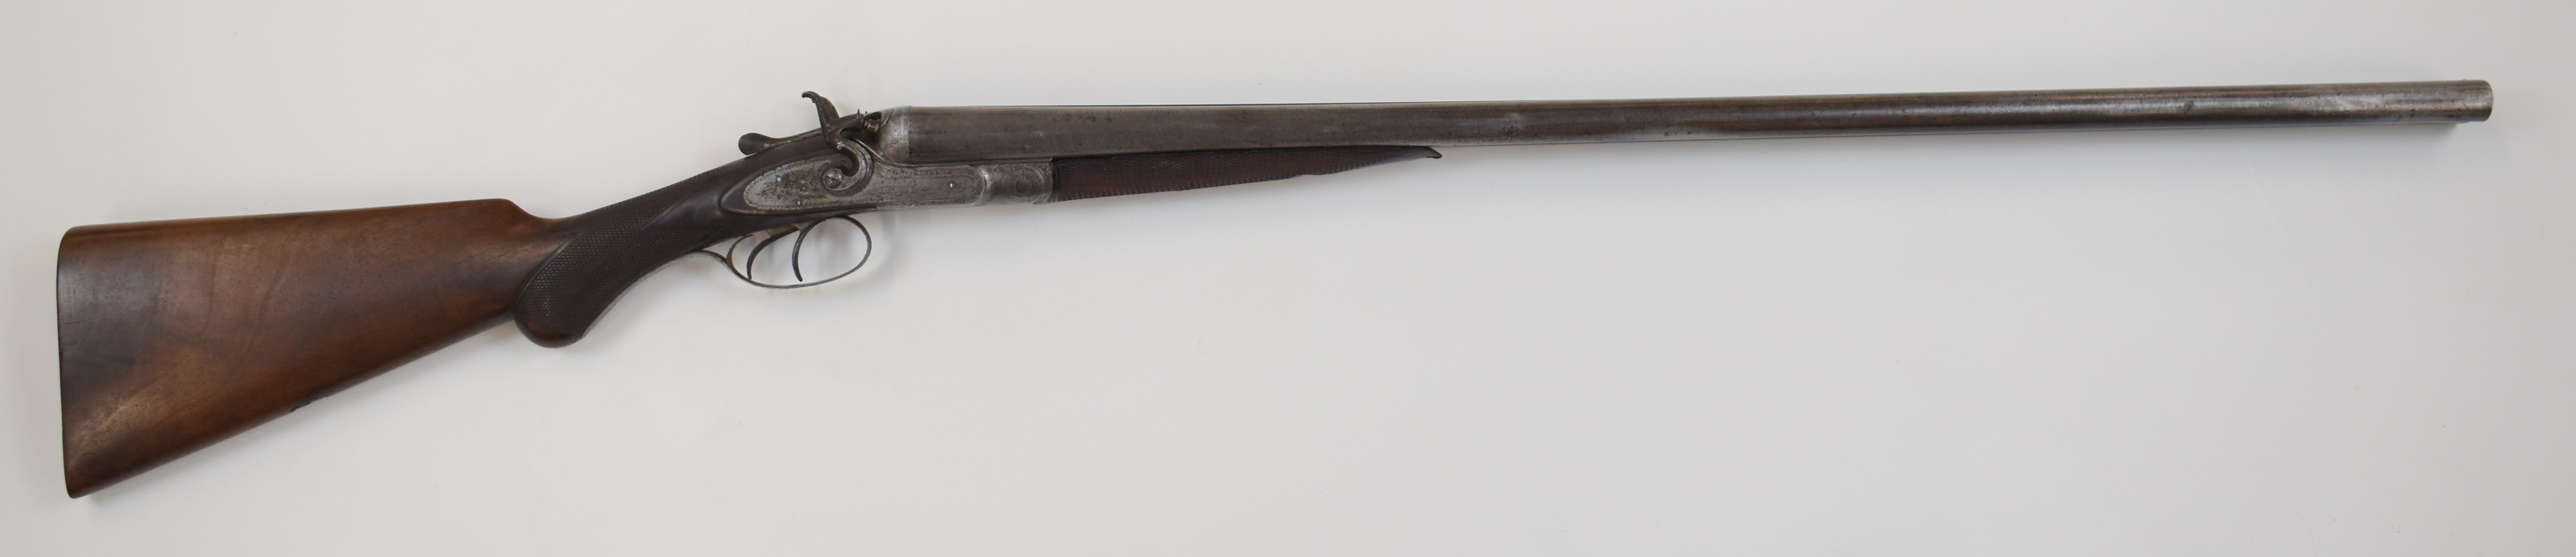 George Edward Lewis 12 bore side by side hammer action shotgun with named and engraved locks, - Image 2 of 13